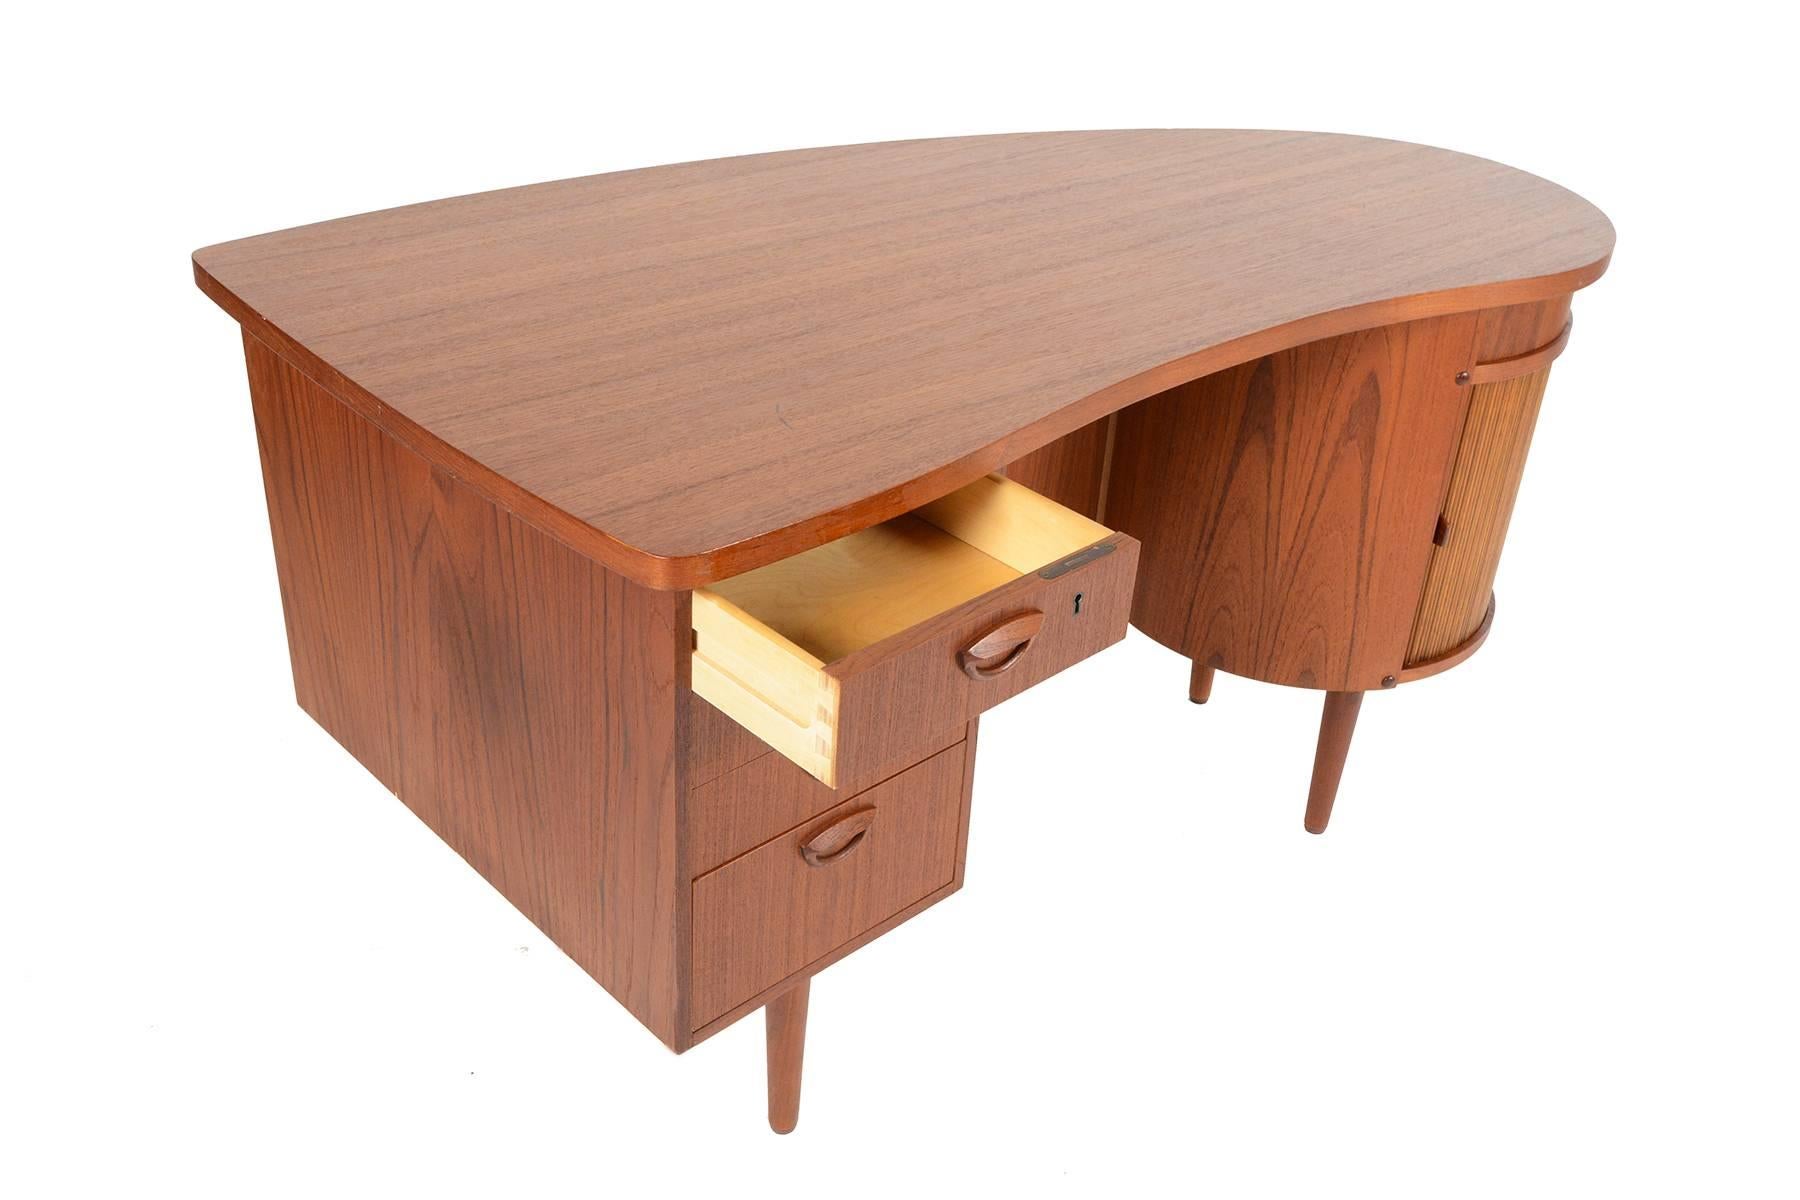 This rare Danish modern Model 54 executive desk was designed by Kai Kristiansen for Feldballes Mobelfabrik in the 1960s. Crafted in old growth teak, this desk features four drawers with Kristiansen's distinctive circular pulls, bookshelf back, and a